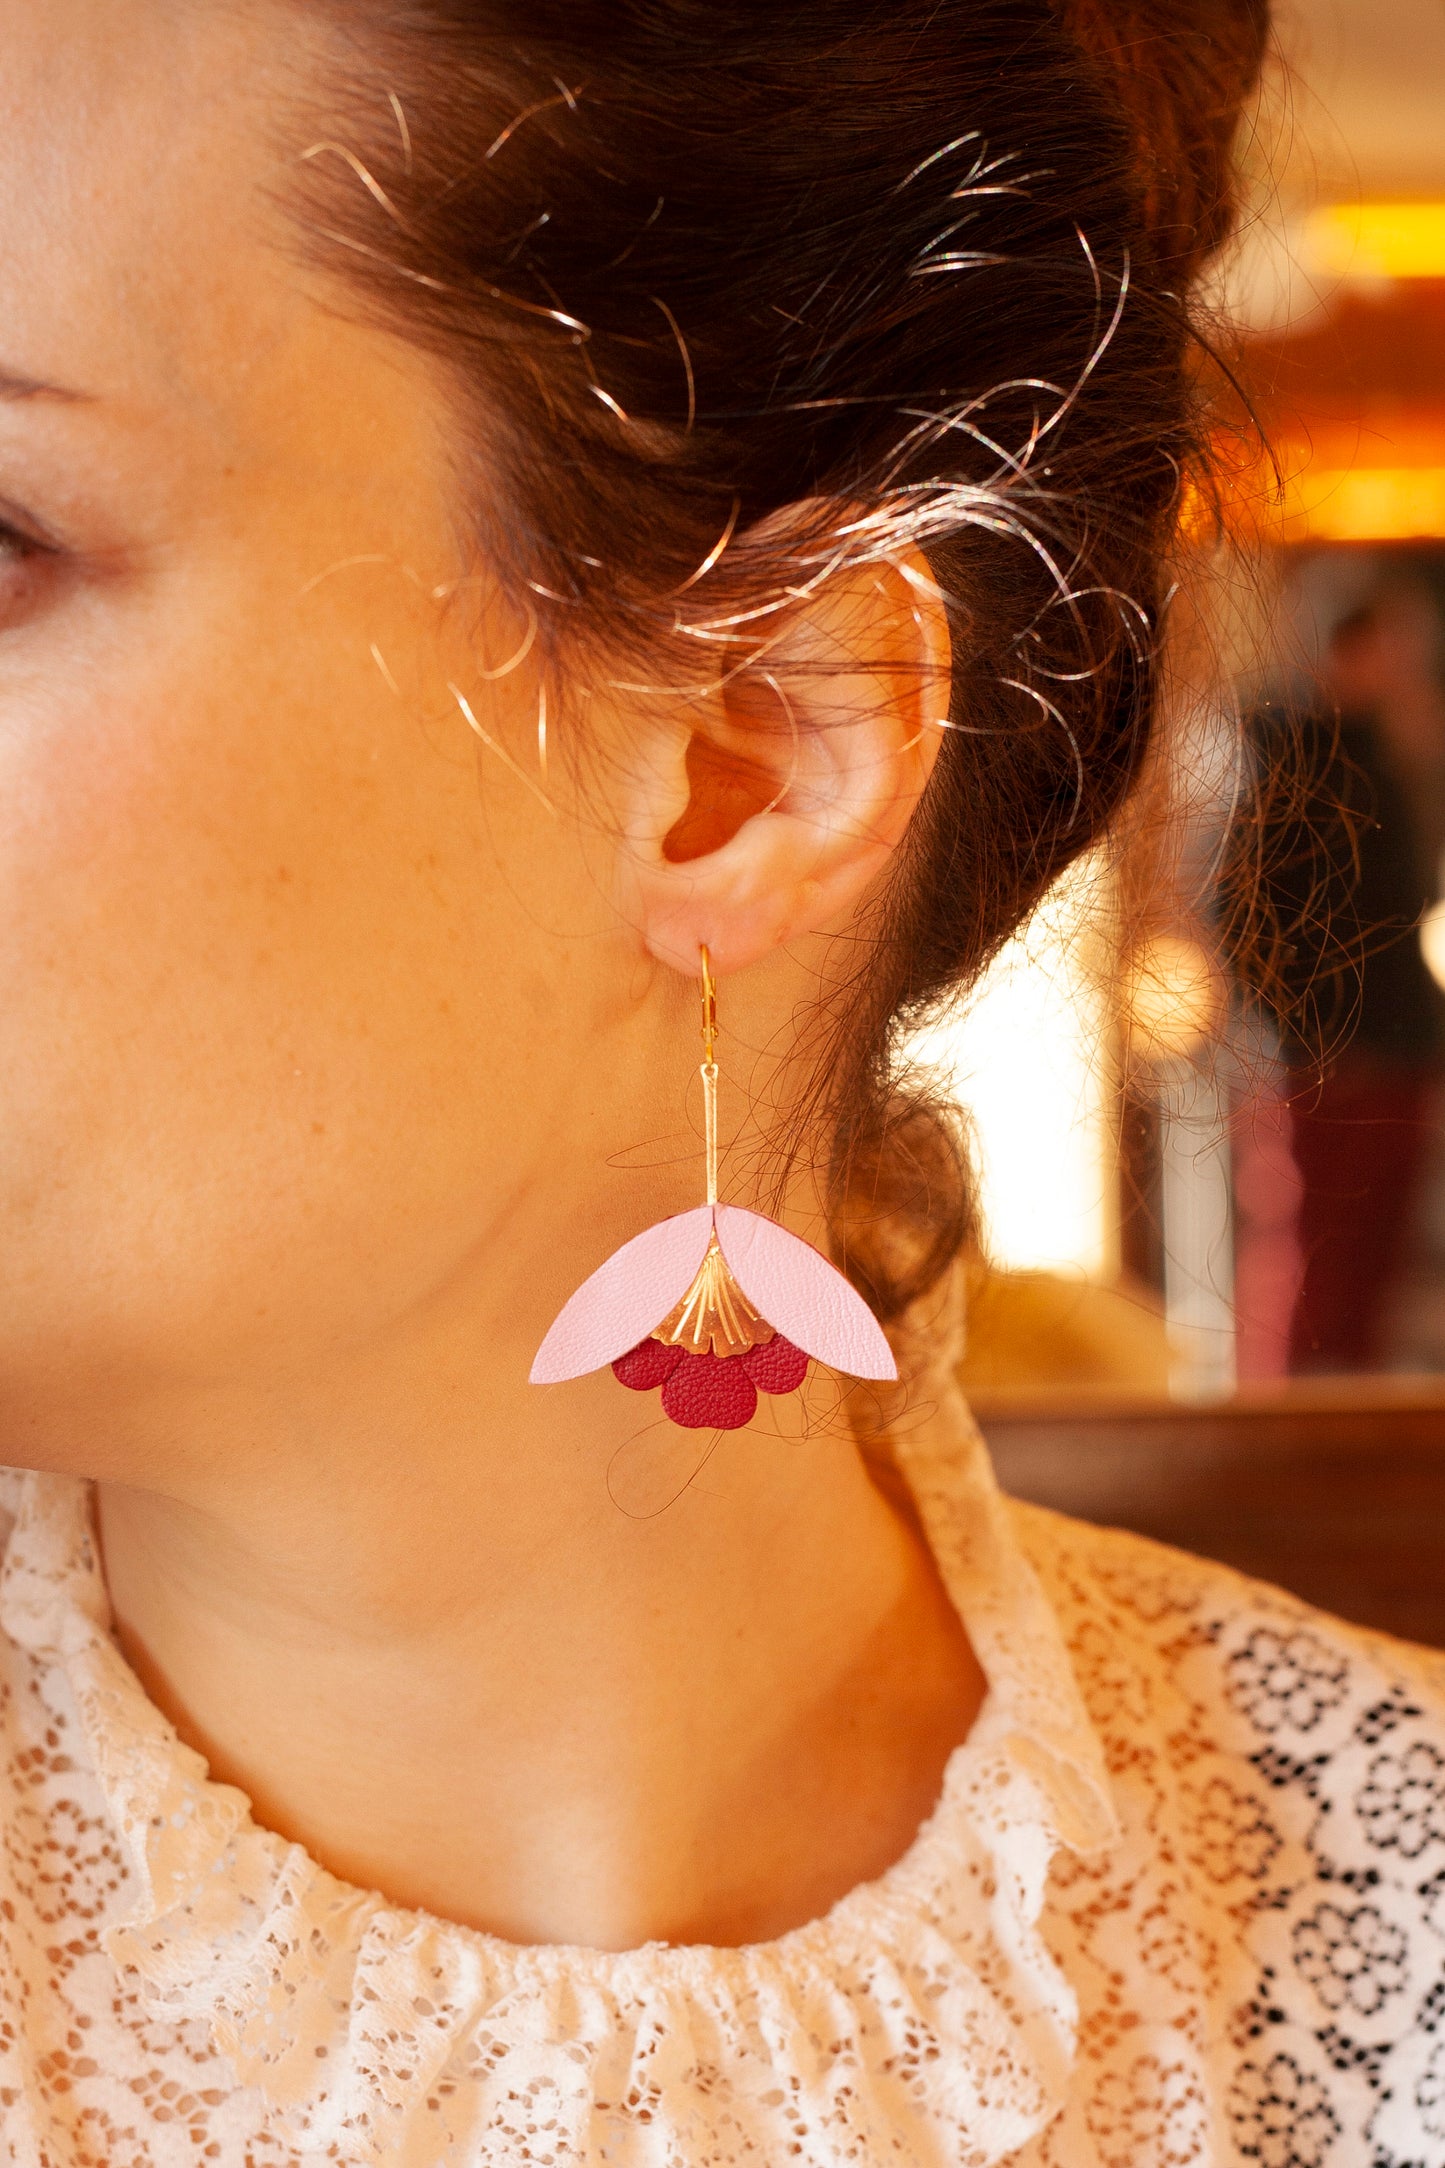 Ginkgo Flowers earrings in pink and gold leather